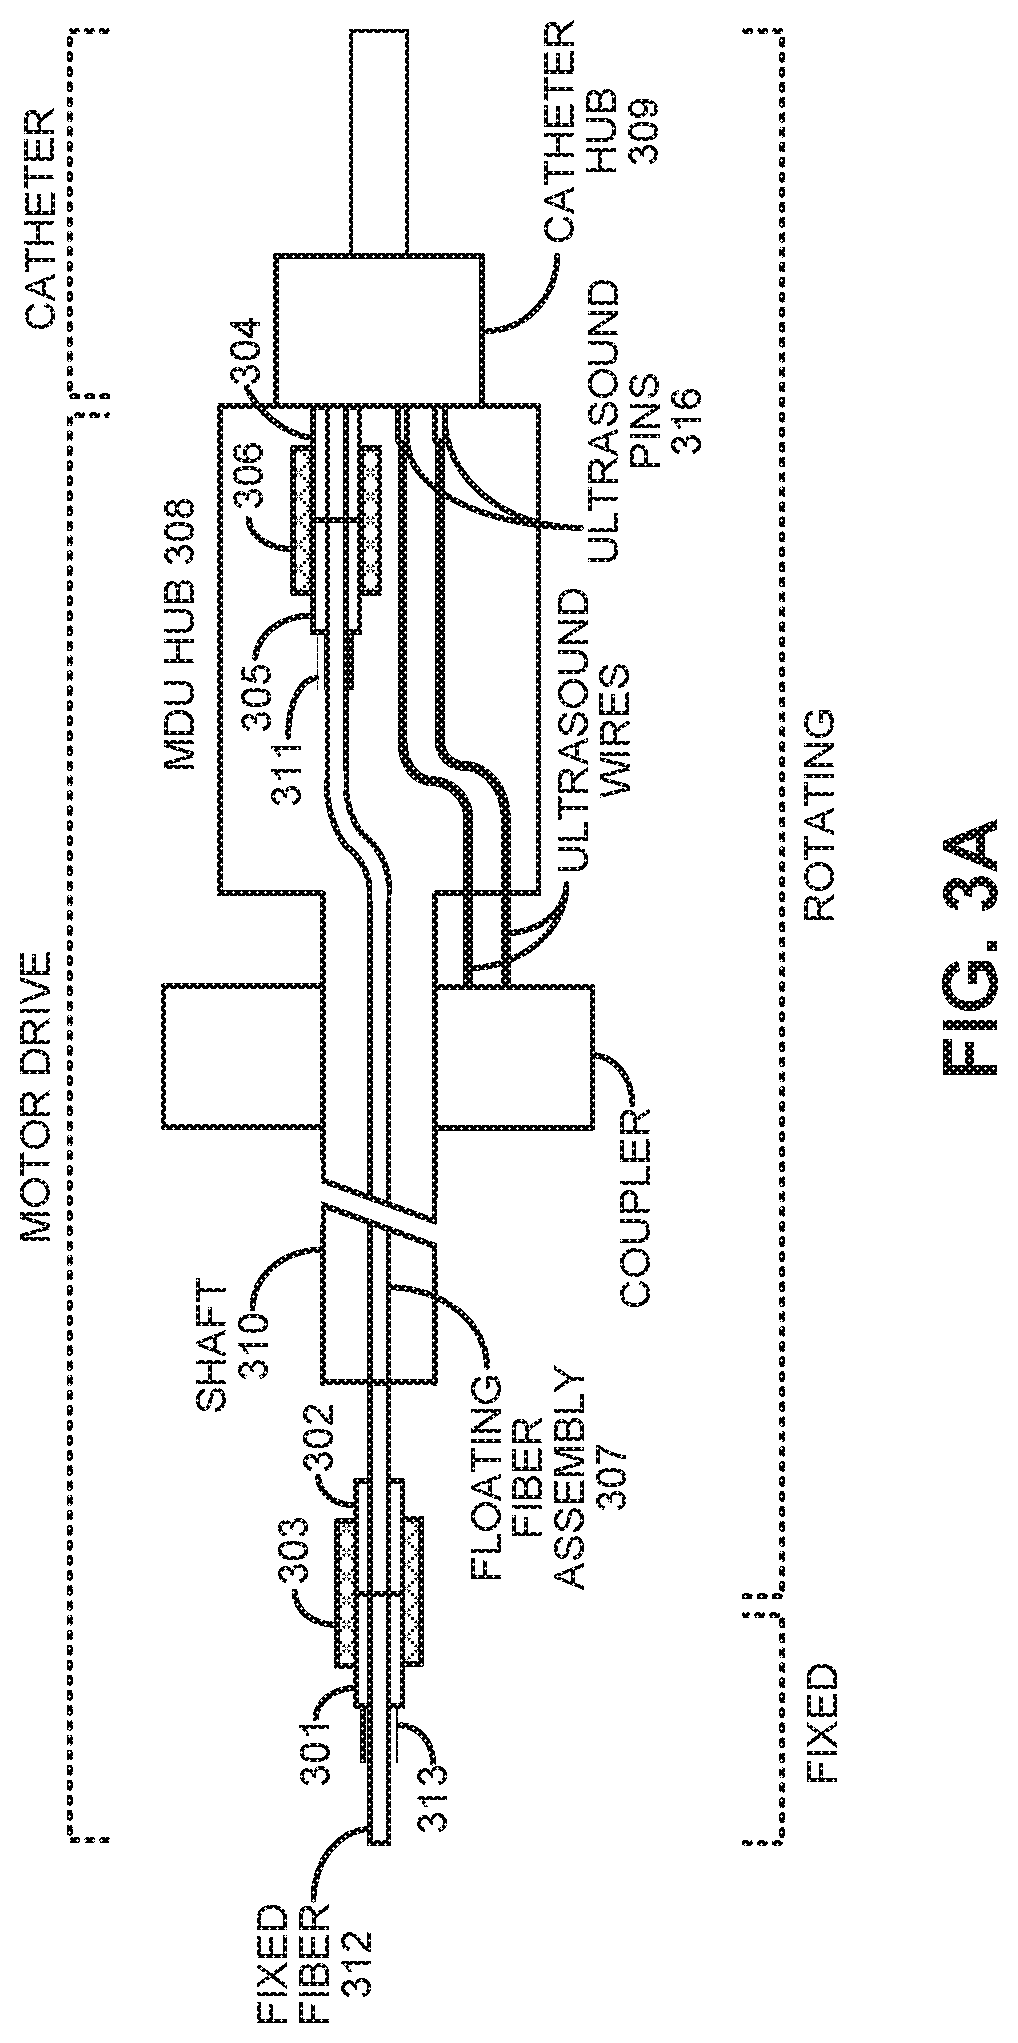 Single catheter system that provides both intravascular ultrasound and fluorescence lifetime imaging